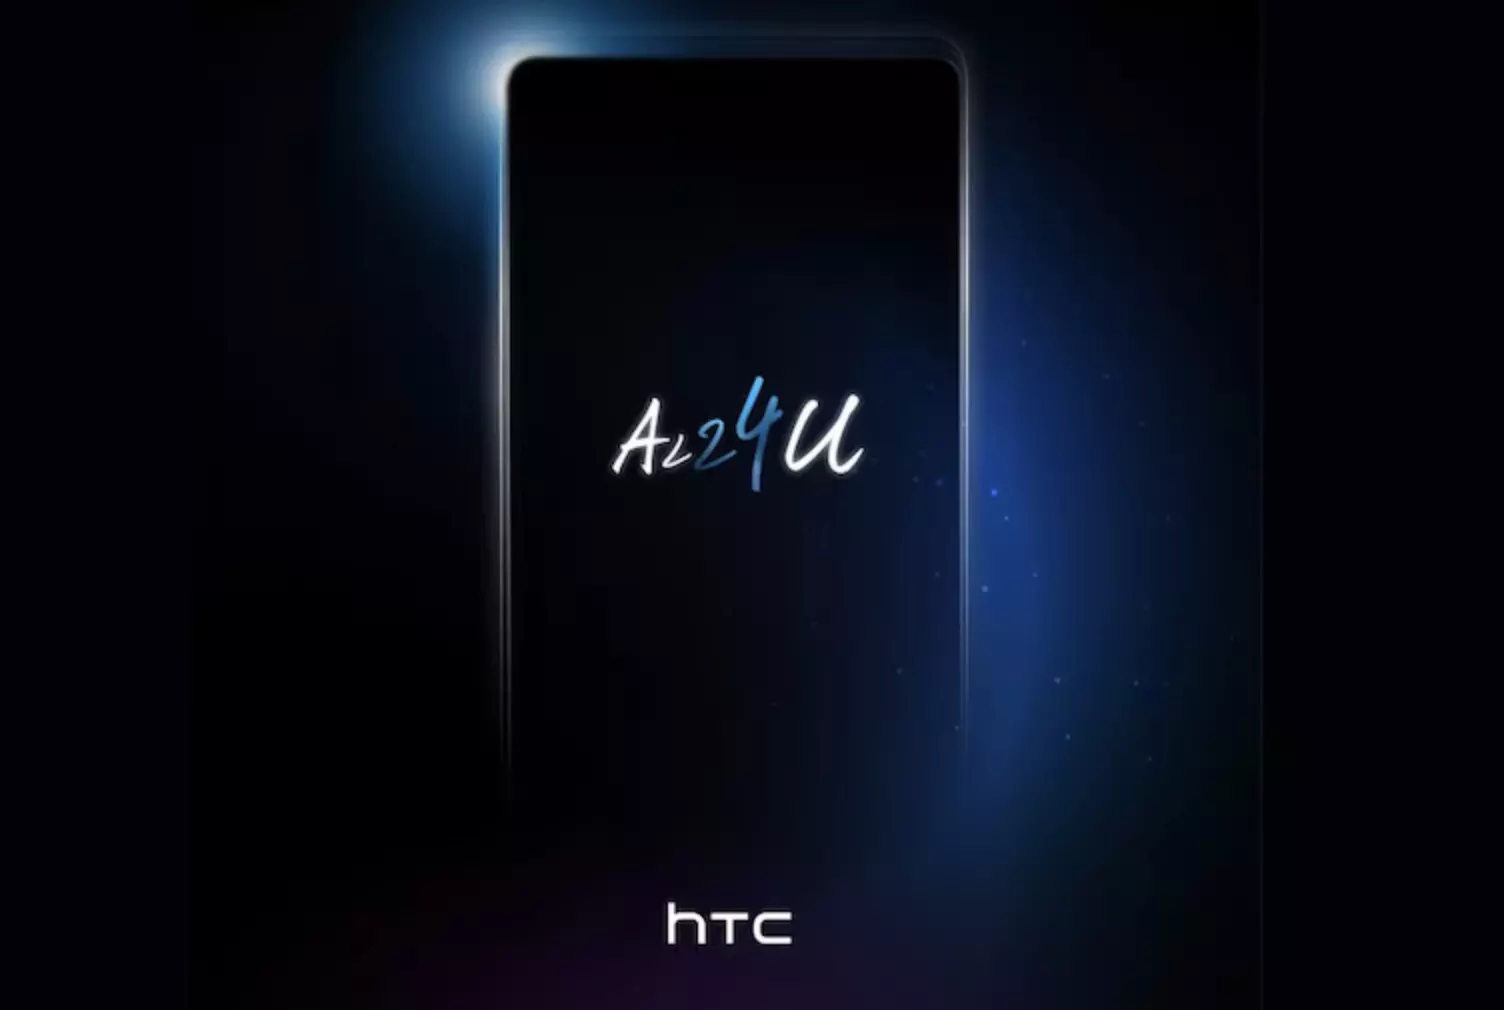 HTC returns with the mysterious HTC U24 featuring Al24U text: Teaser